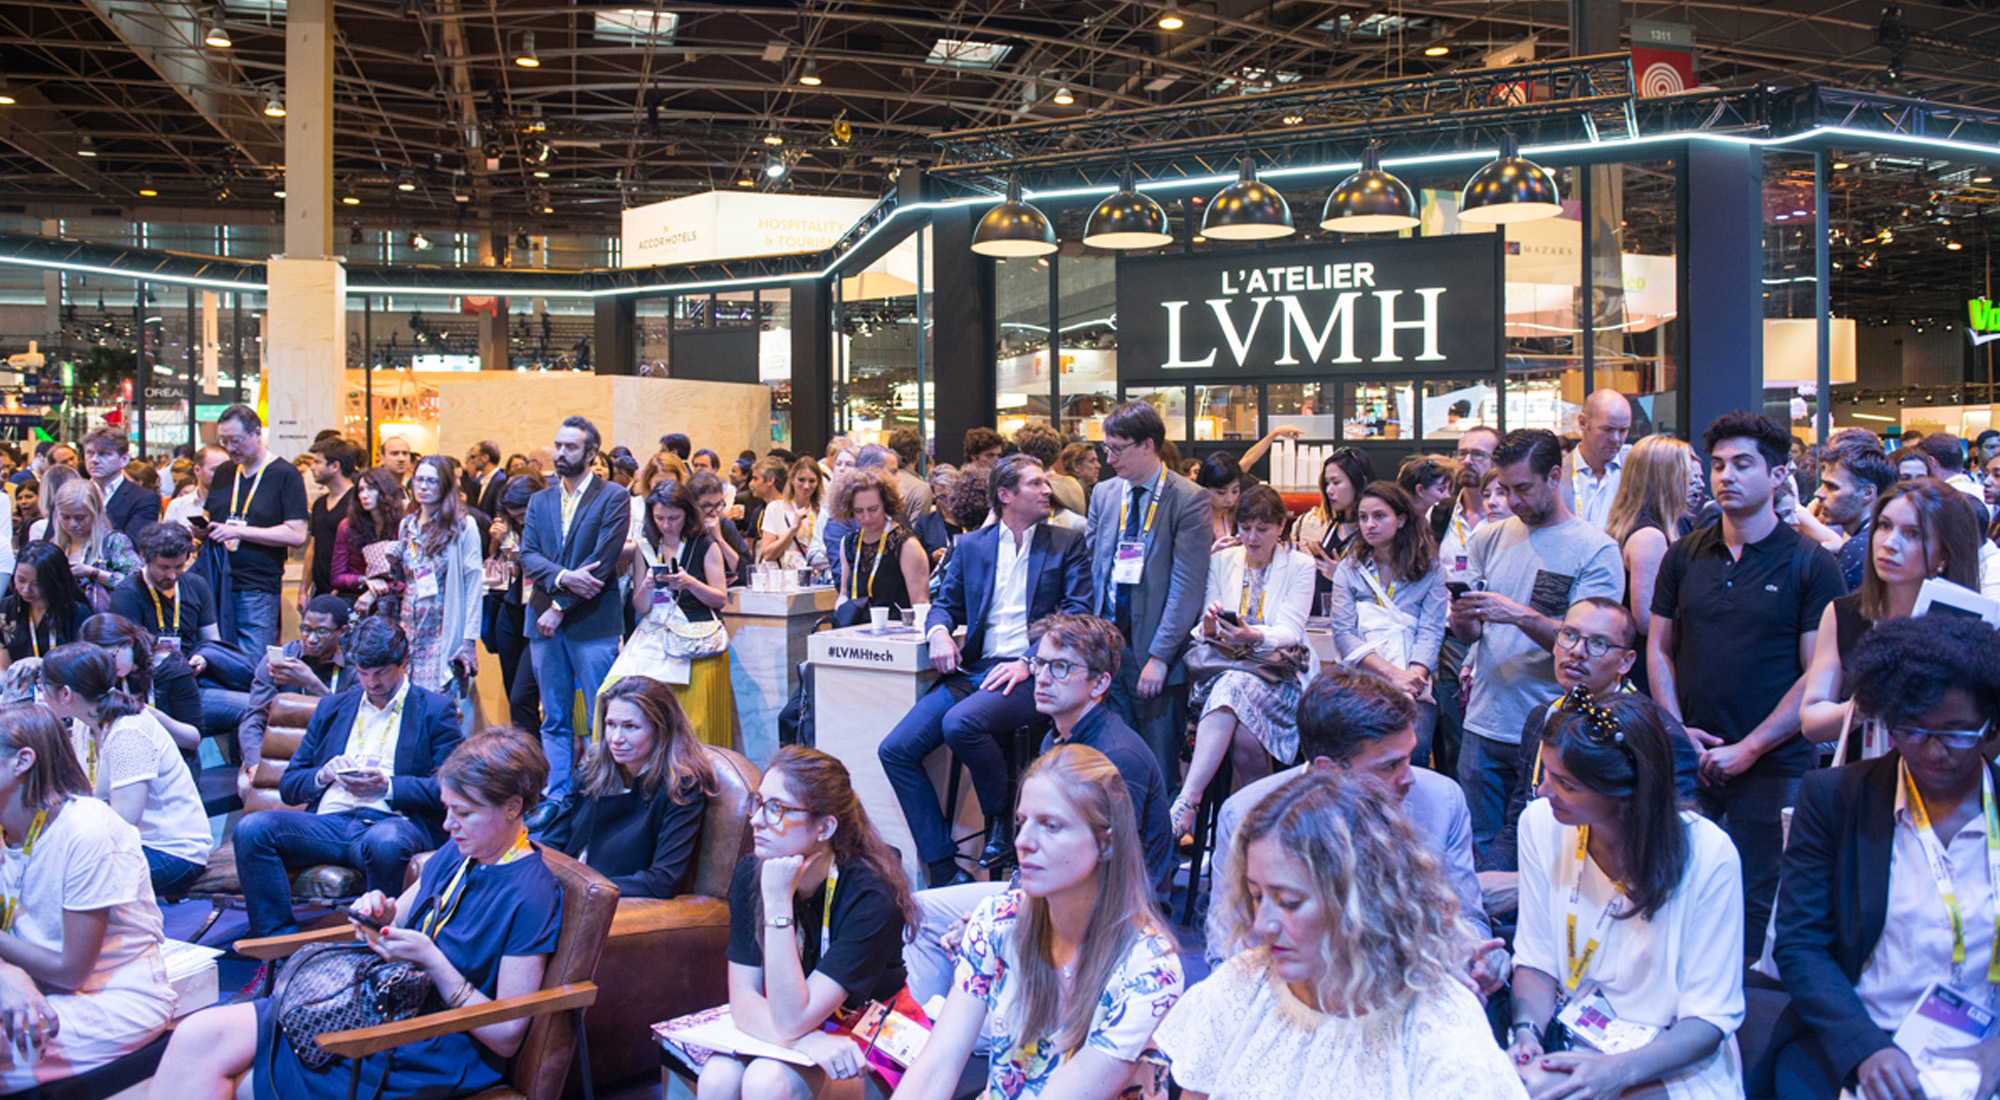 LVMH Names 30 Finalists for Innovation Award at VivaTech – WWD